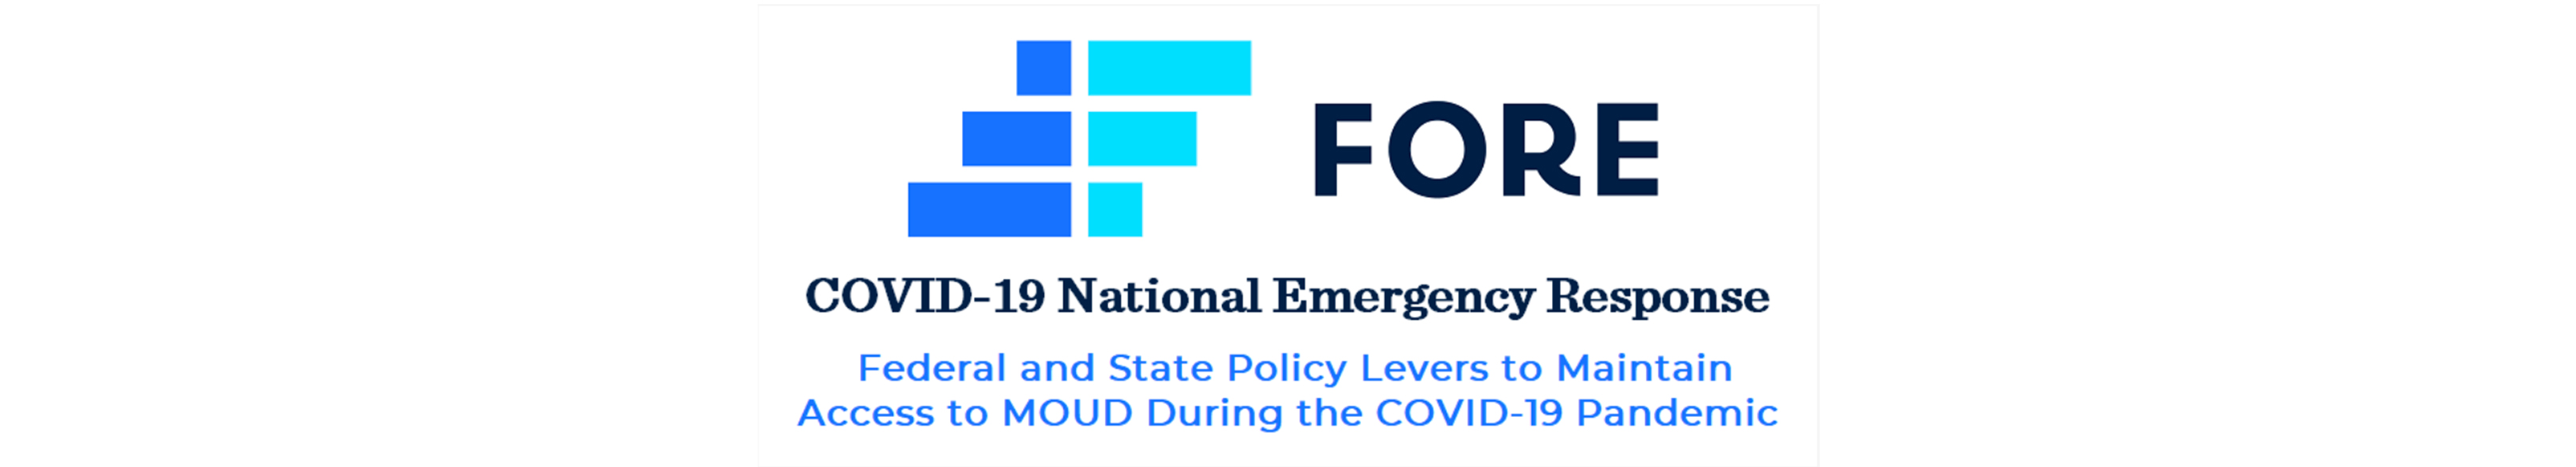 Federal and State Policy Levers to Maintain Access to MOUD During the COVID-19 Pandemic